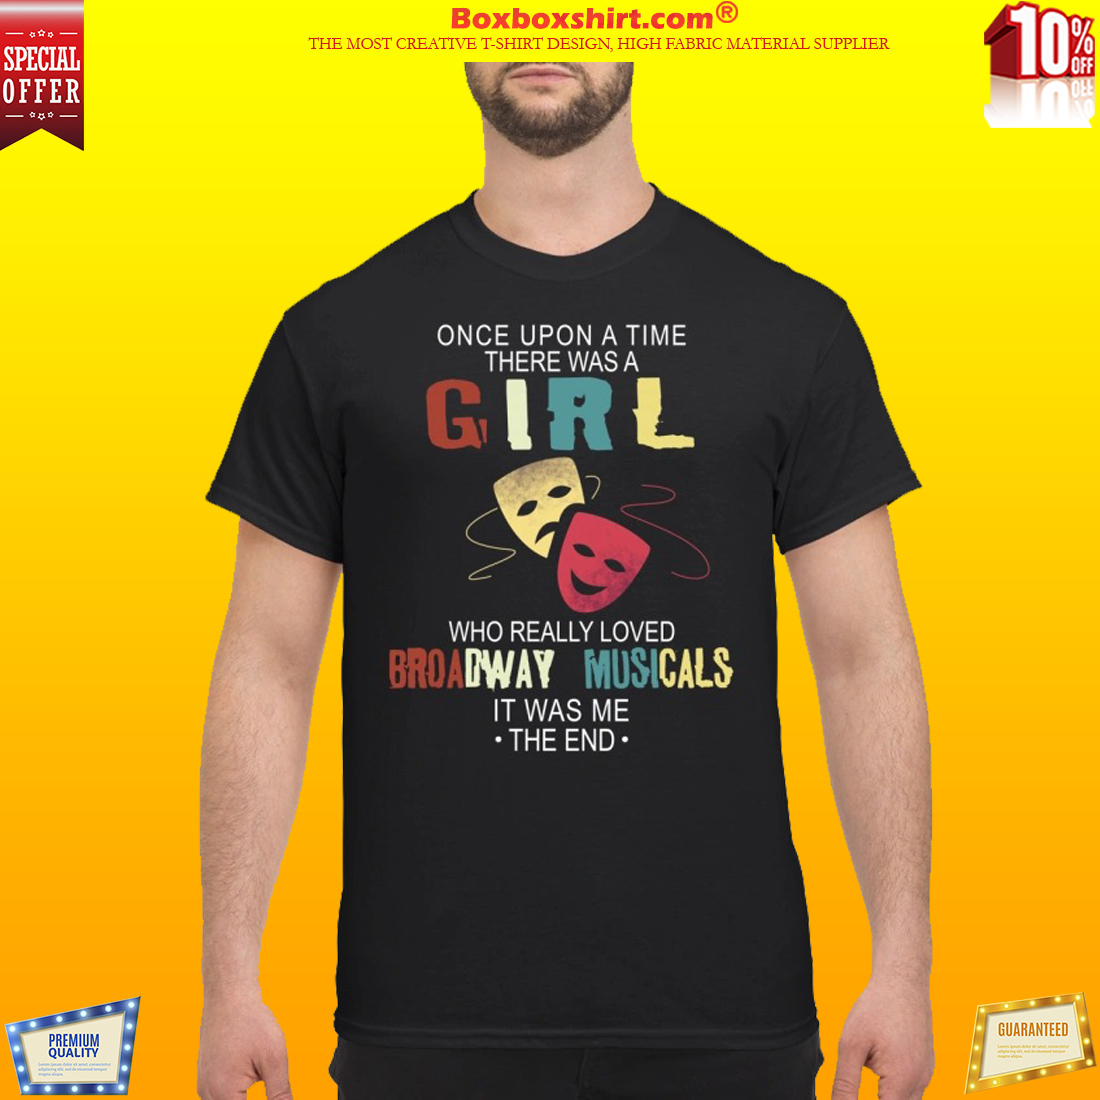 There was a girl who really loved Broadway Musicals classic shirt